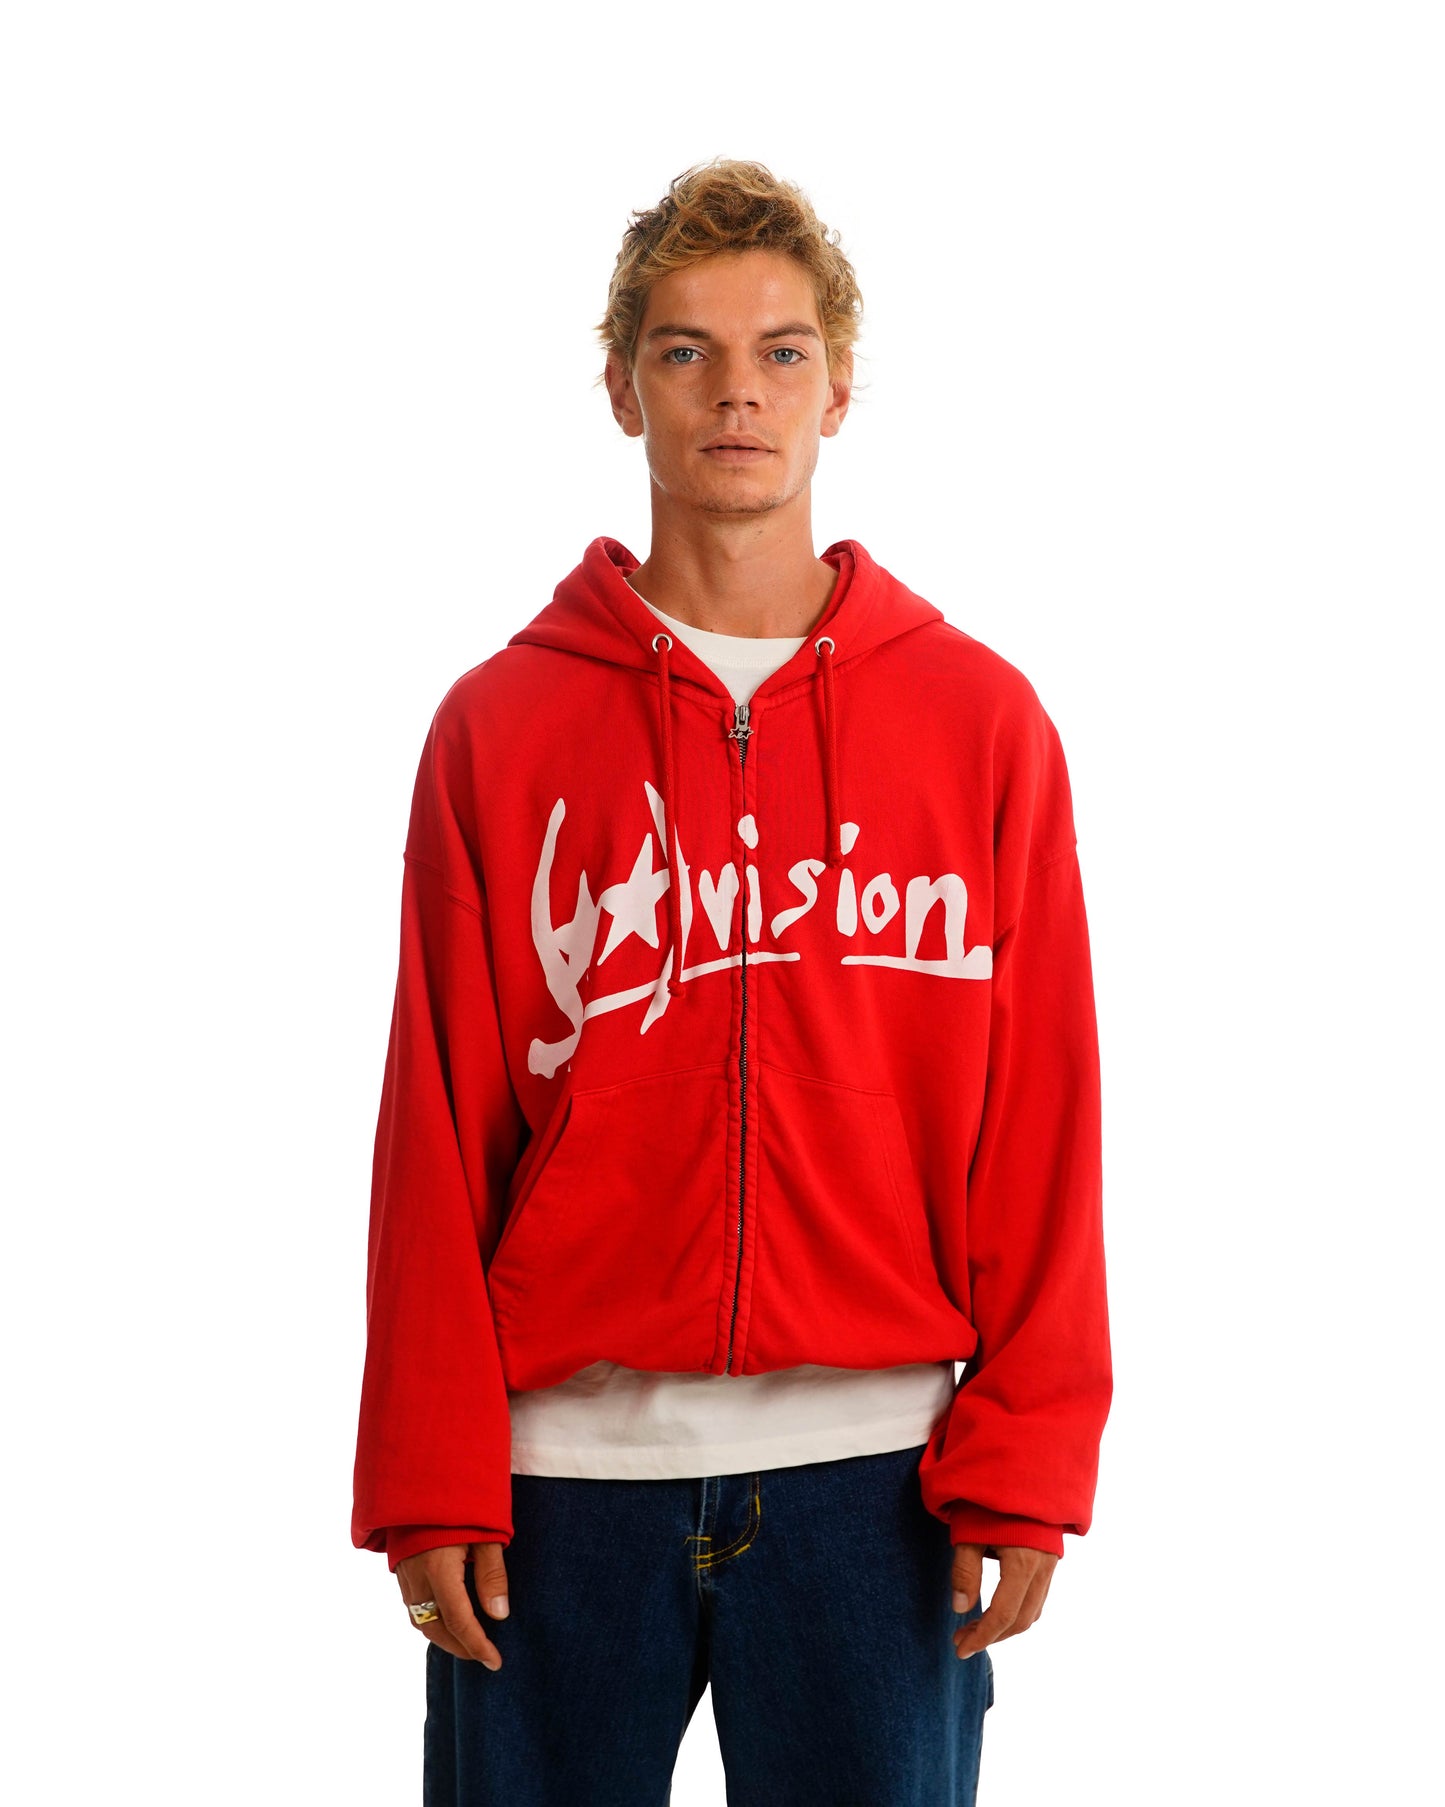 Division x TwoJeys zipper red